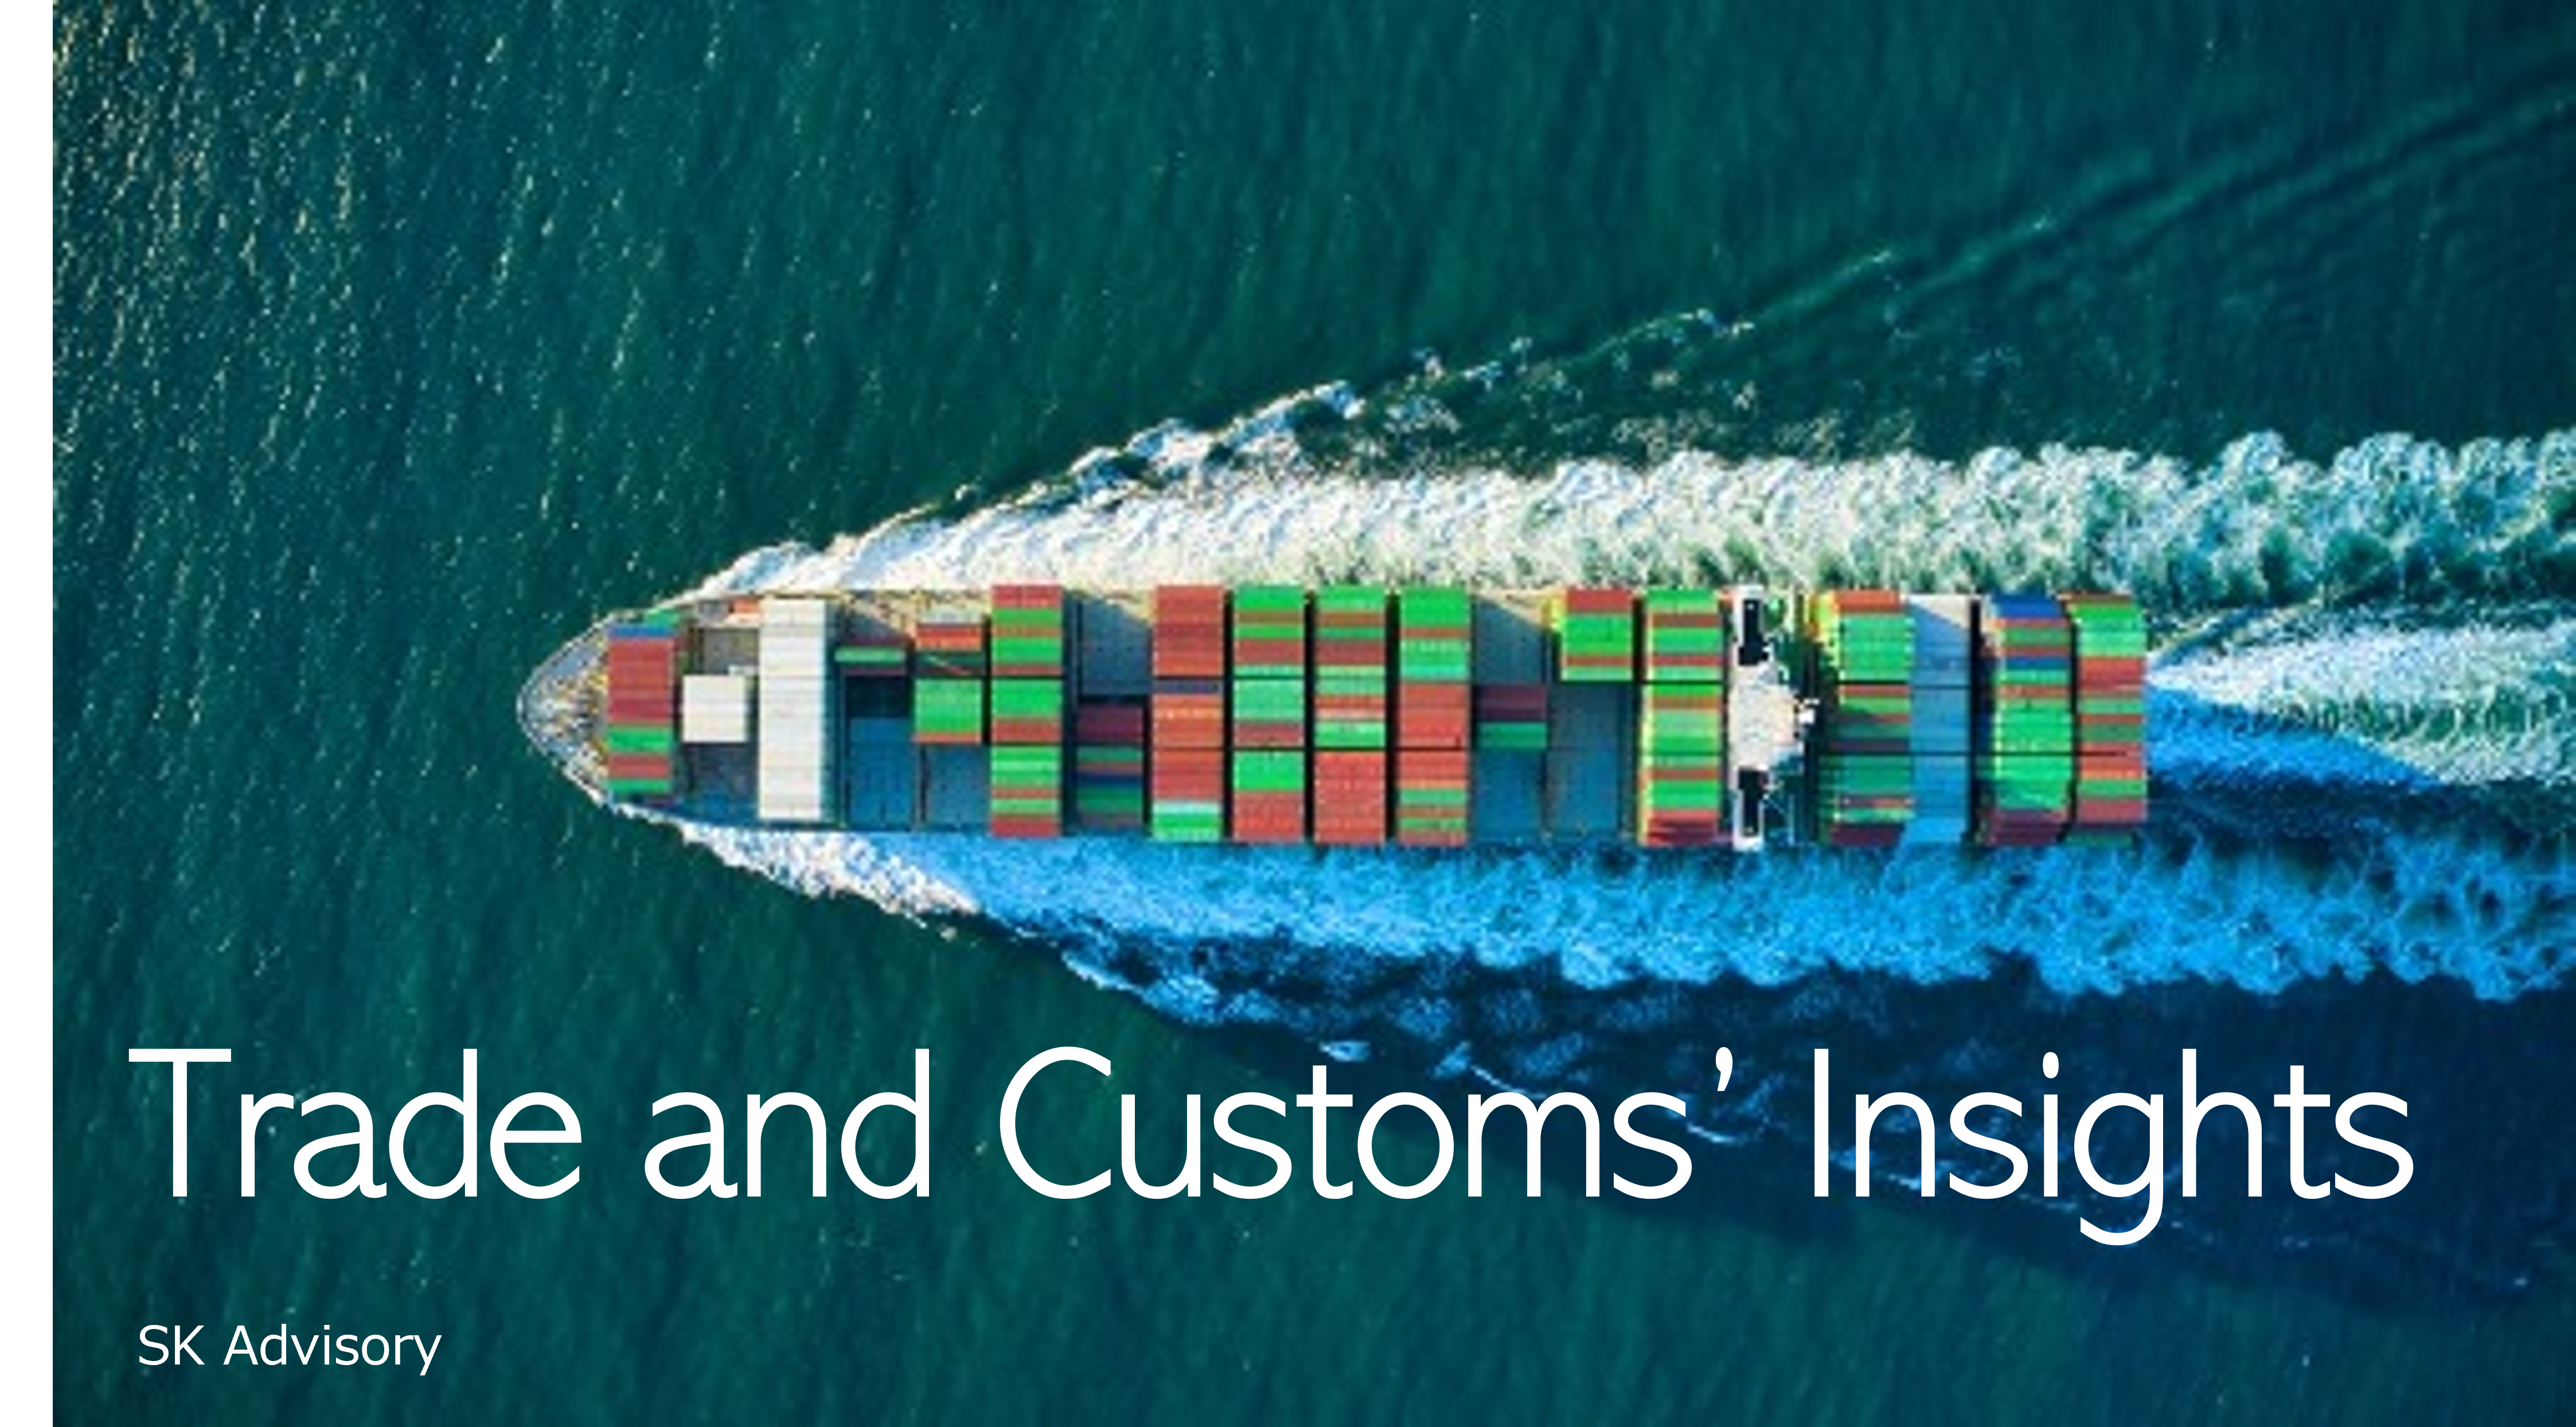 Trade and Customs' viewpoint